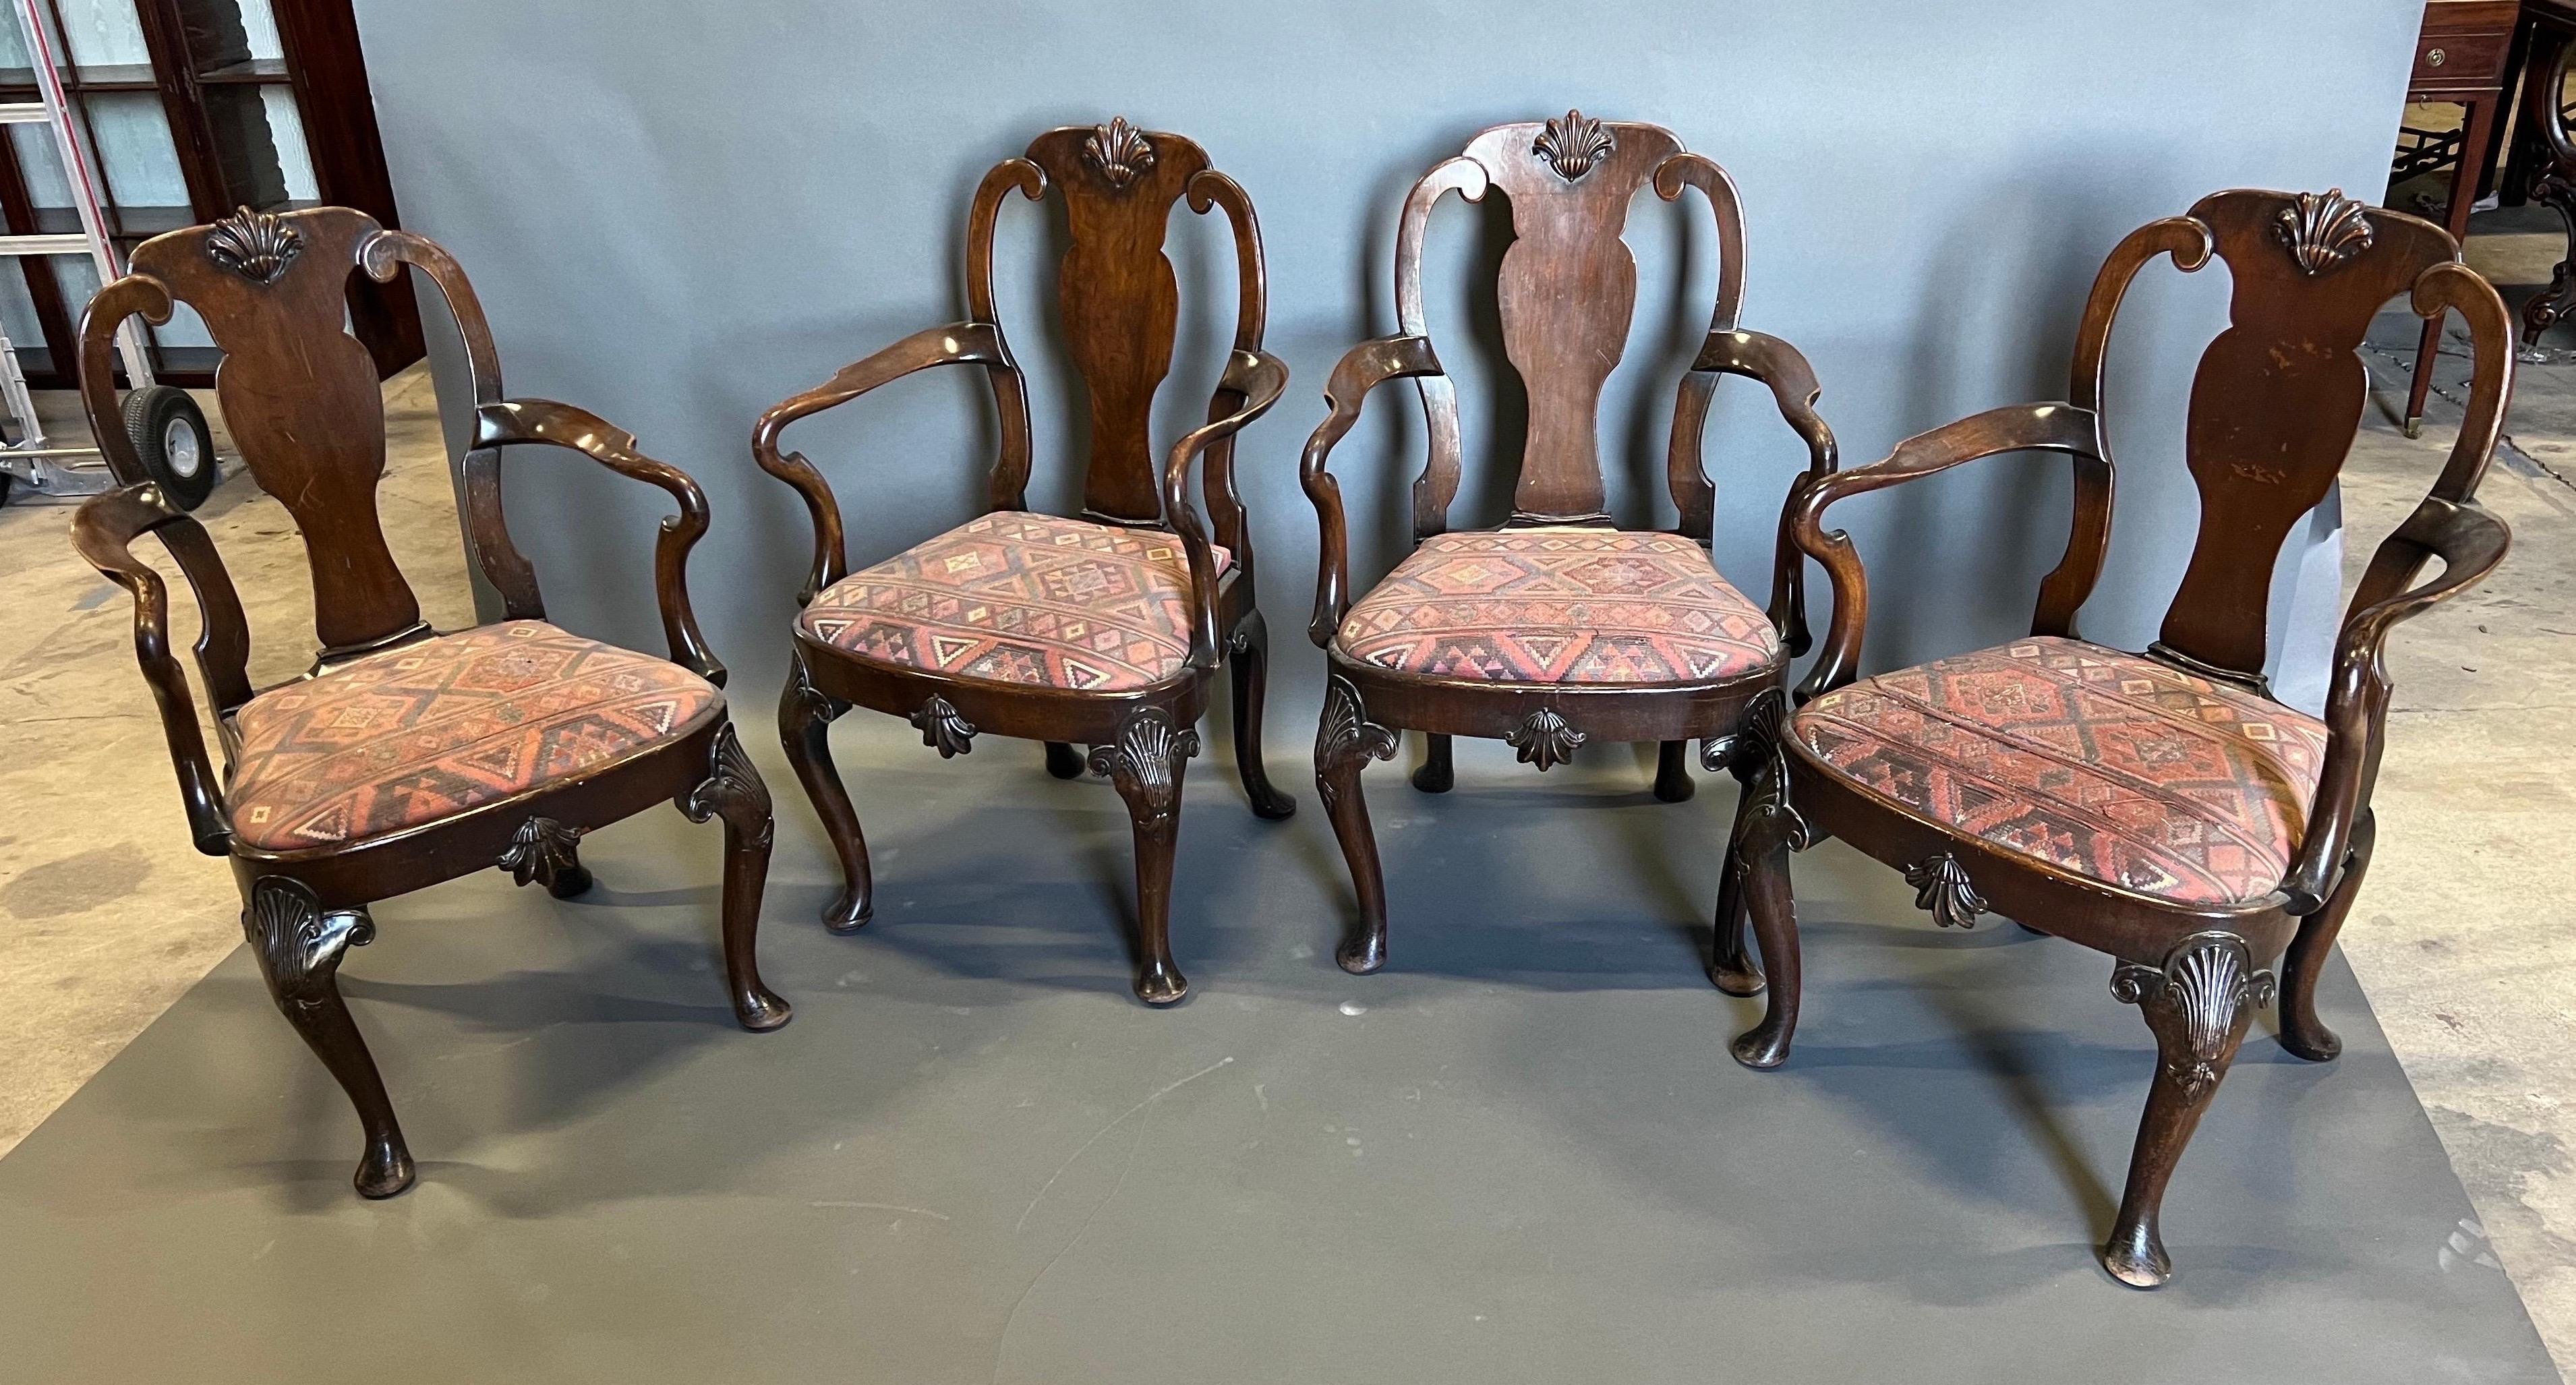 Great set of 4 18th century Queen Anne walnut arm chairs with pad feet and well executed shells carved into the seat rail and crest rail.